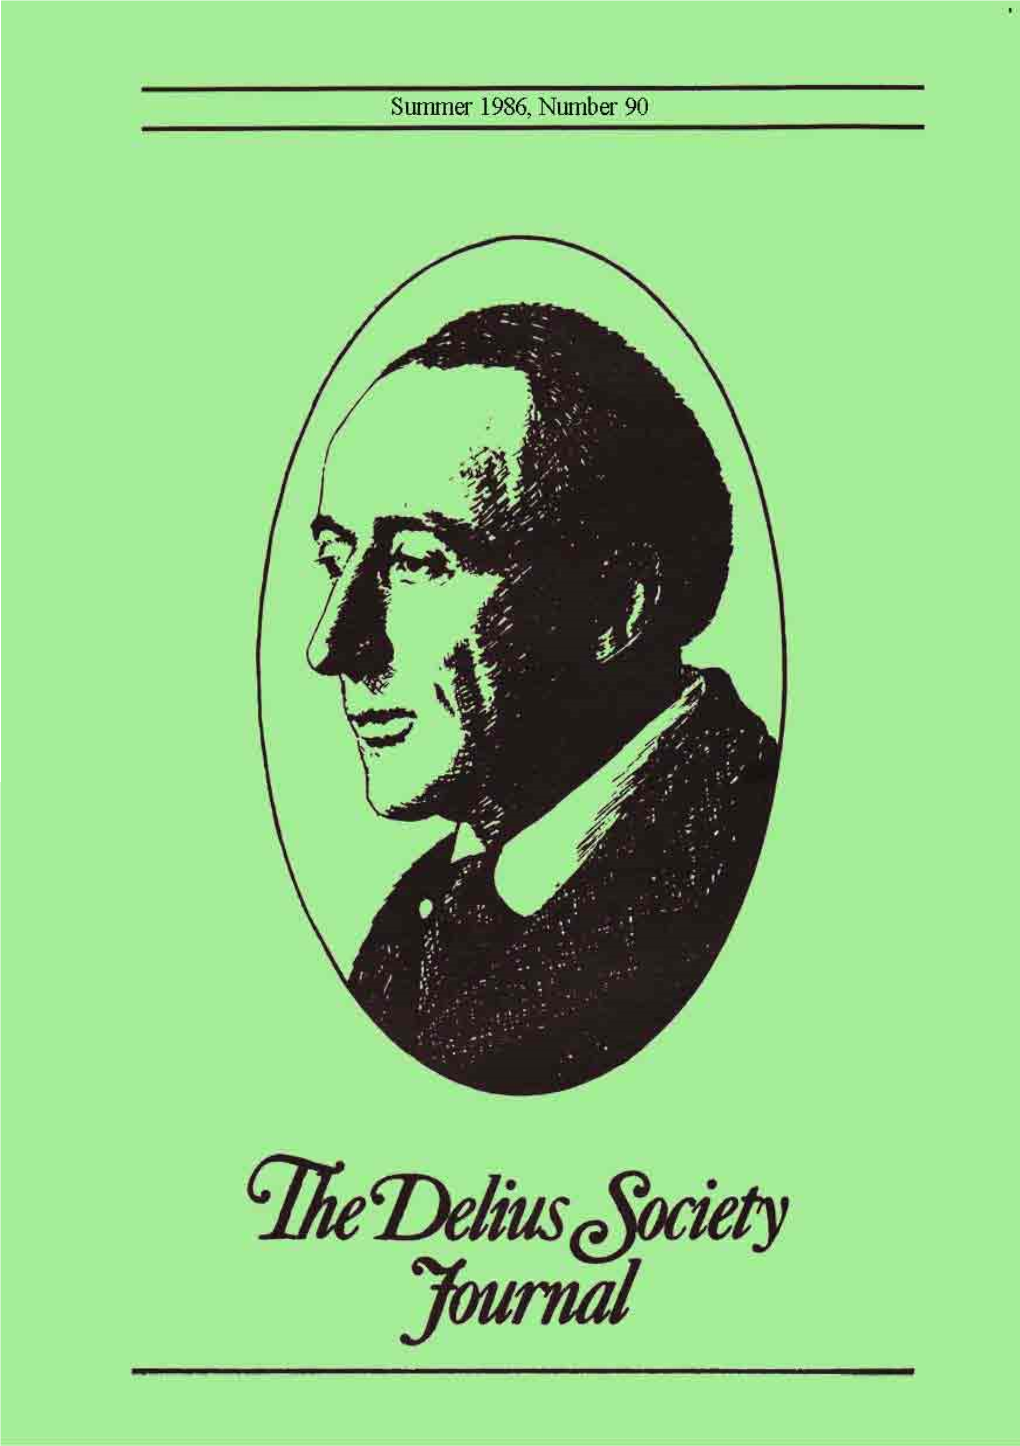 Delius in Danville: a Centenary Celebration by Rolf Stang '" 13